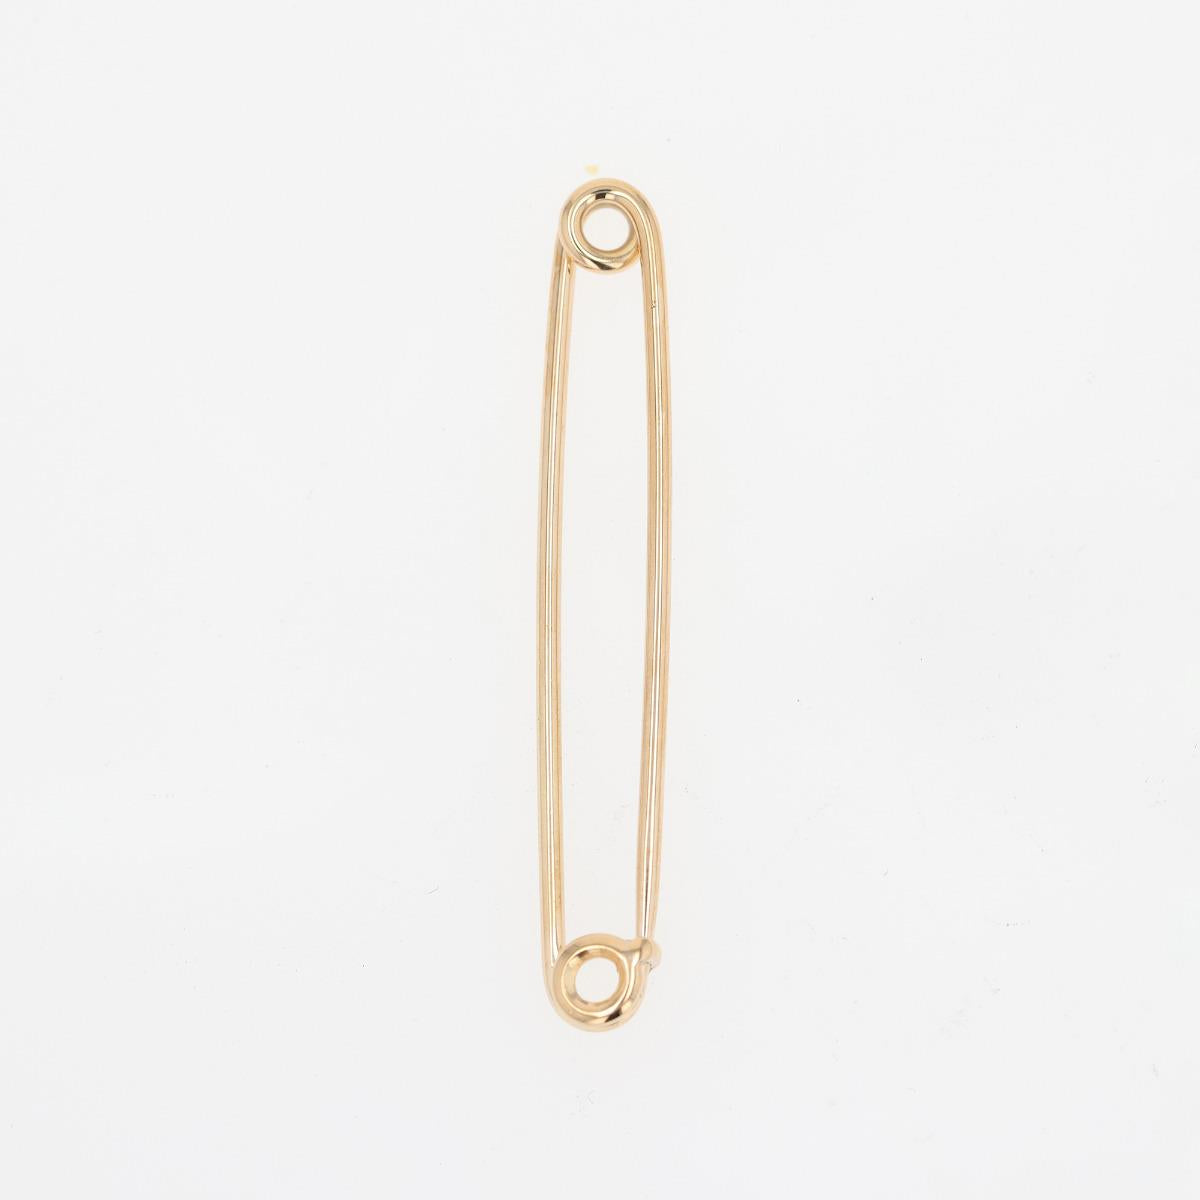 Vintage Tiffany And Co 14K Yellow Gold Safety Pin